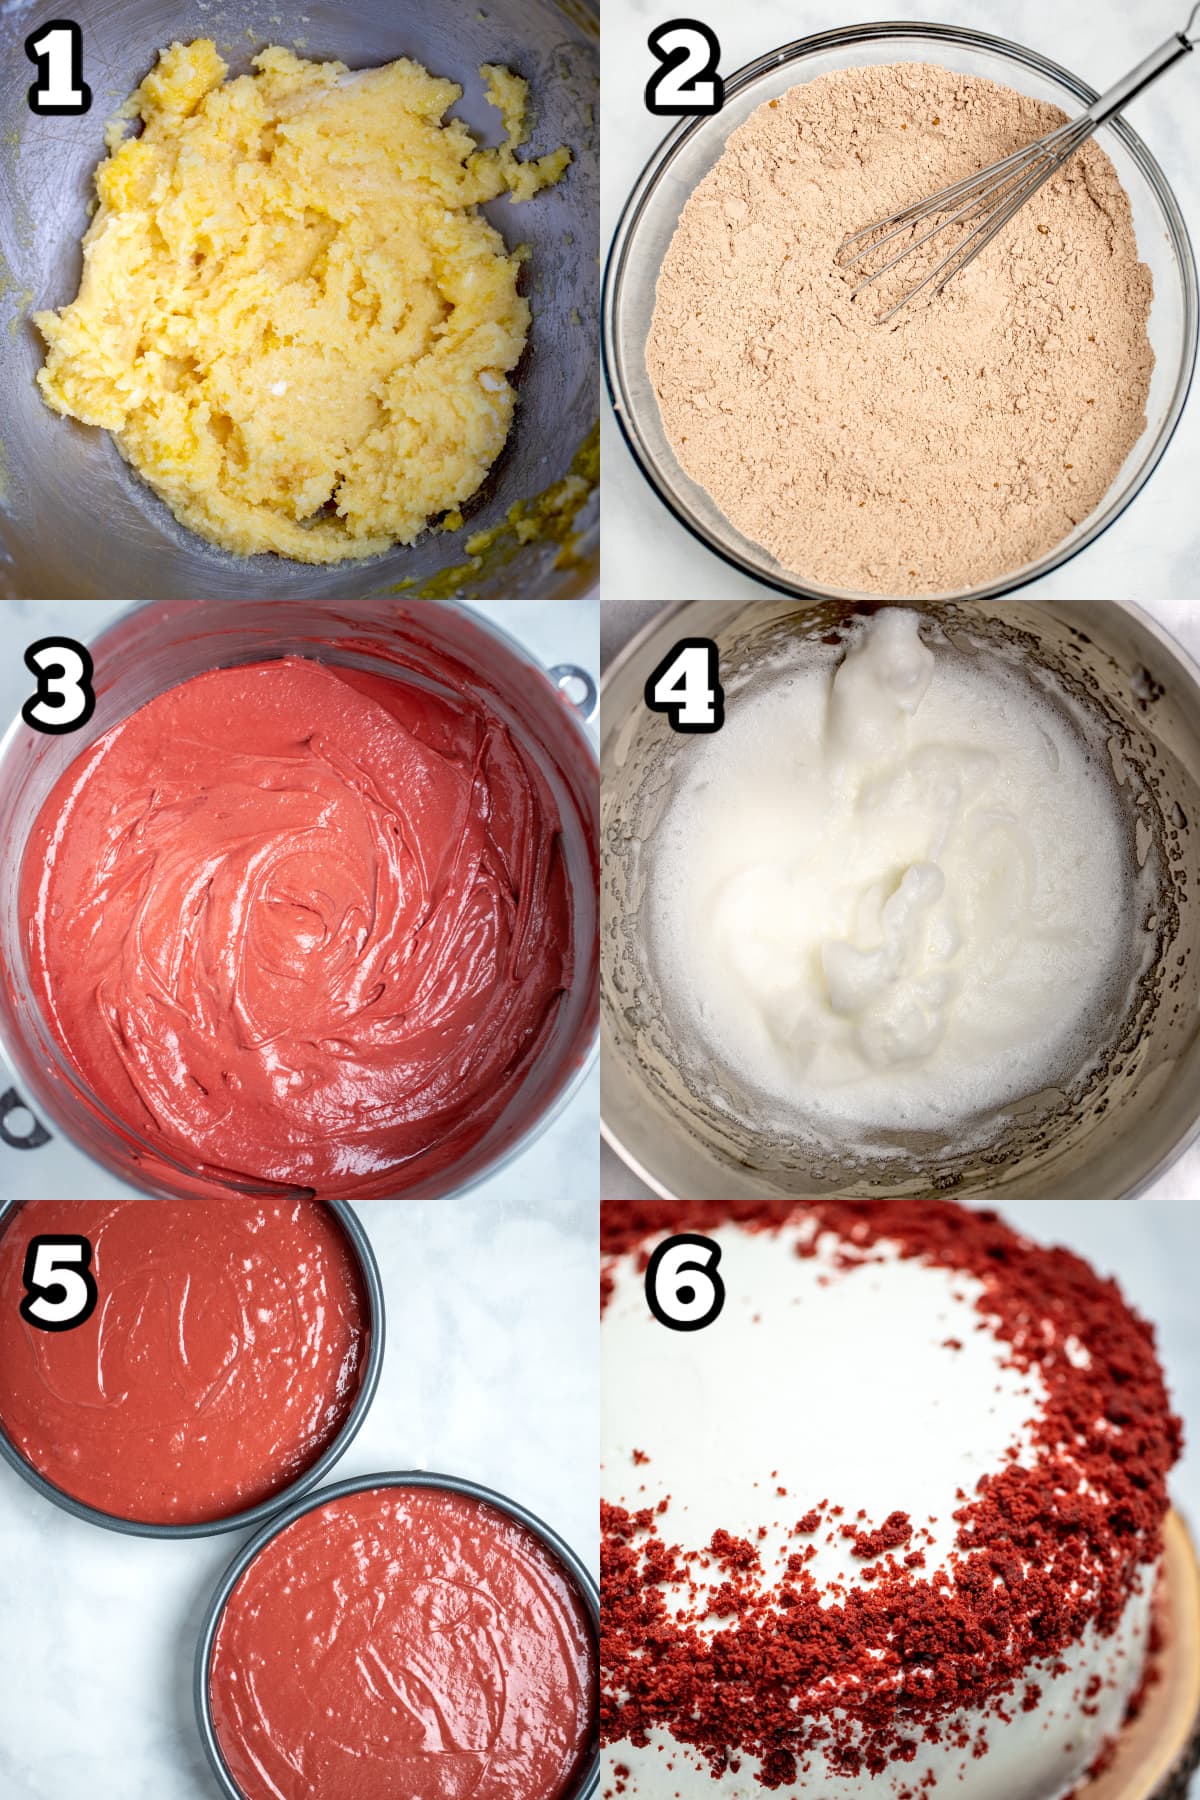 Step by step photos for how to make gluten free red velvet cake.